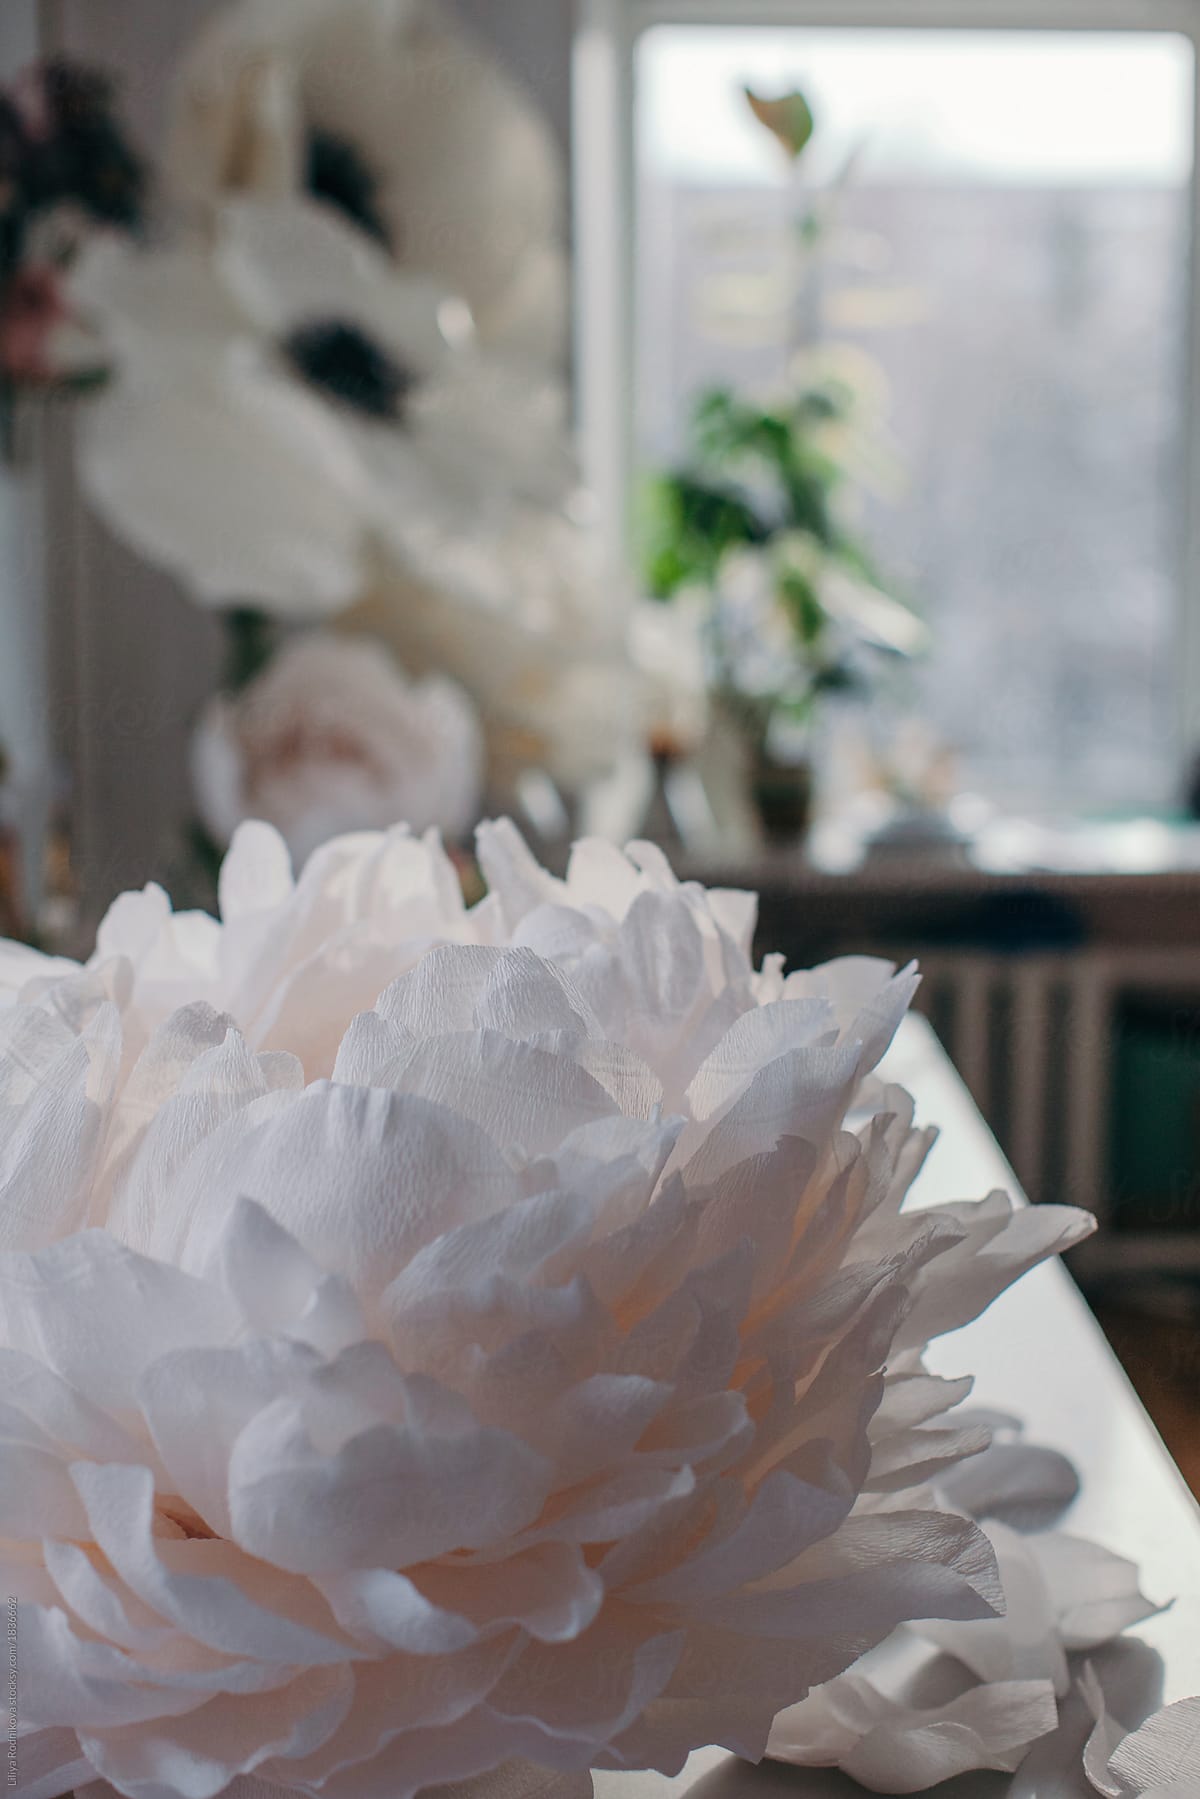 Big paper flower on the table in workshop